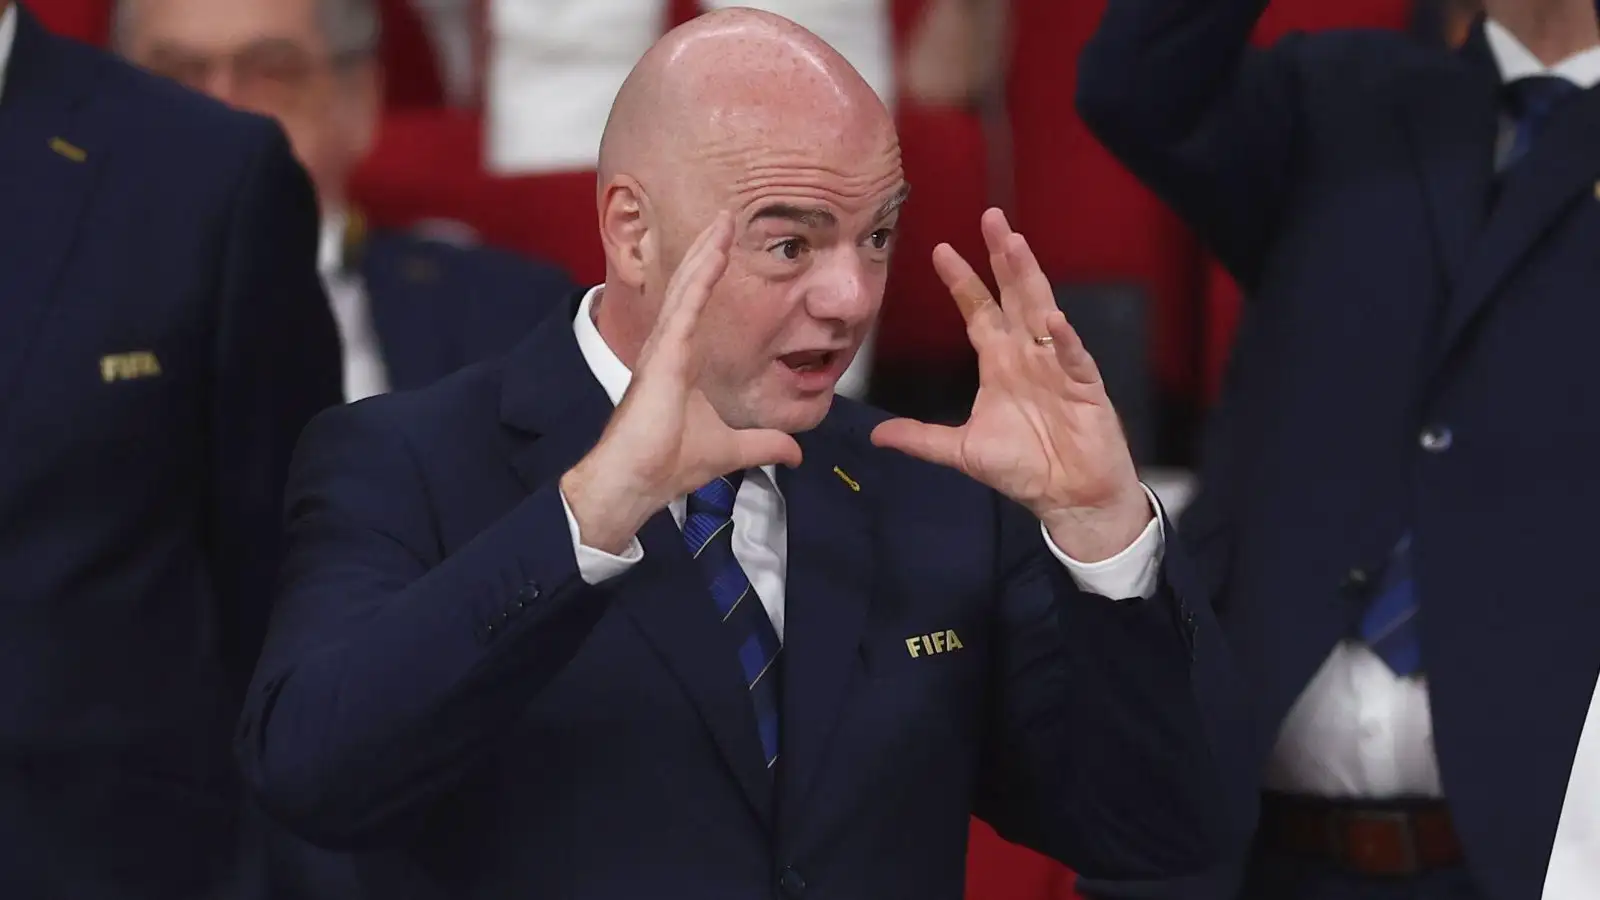 FIFA president Gianni Infantino attends a World Cup match.